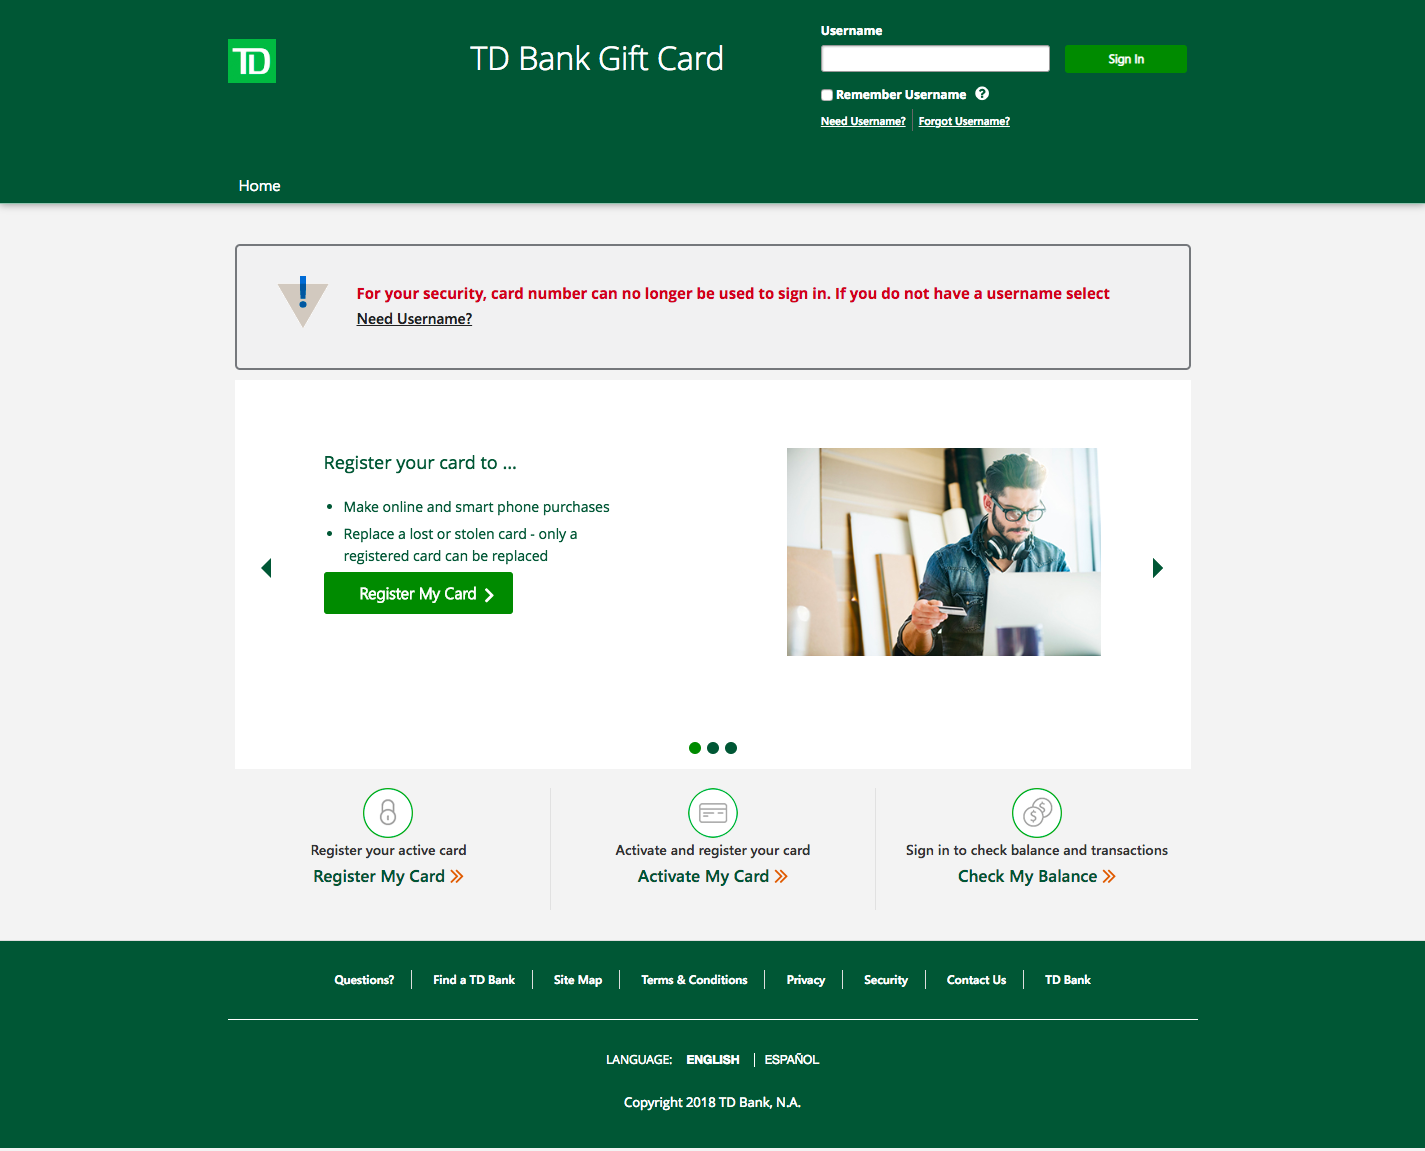 TD Bank Gift Card Home Page